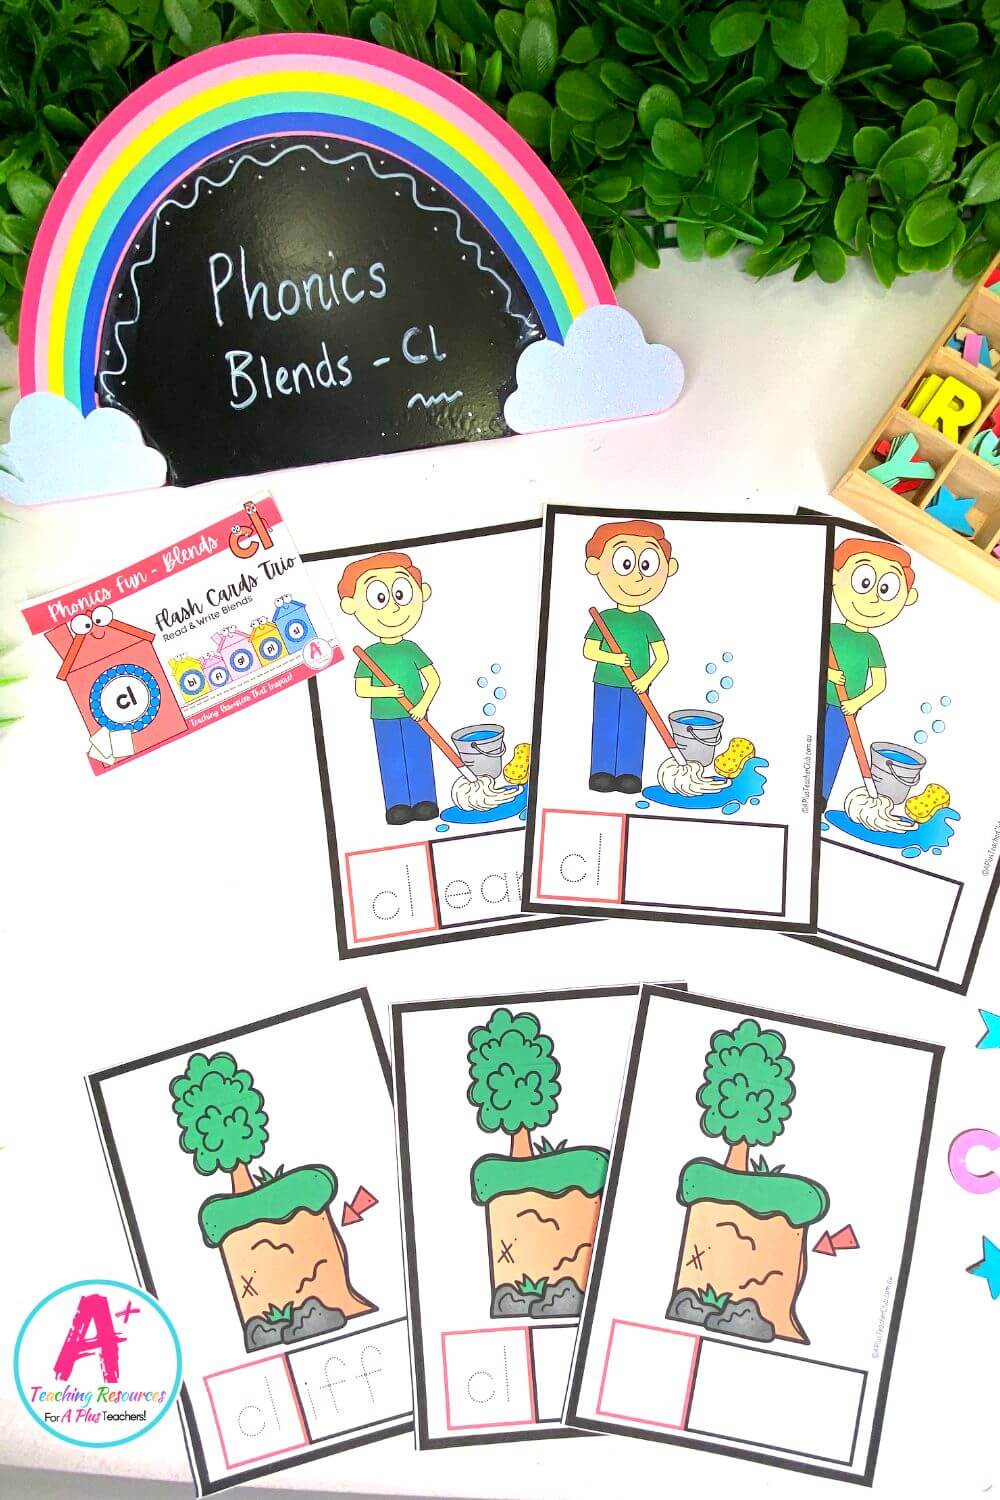 cl Consonant Blends Flashcards